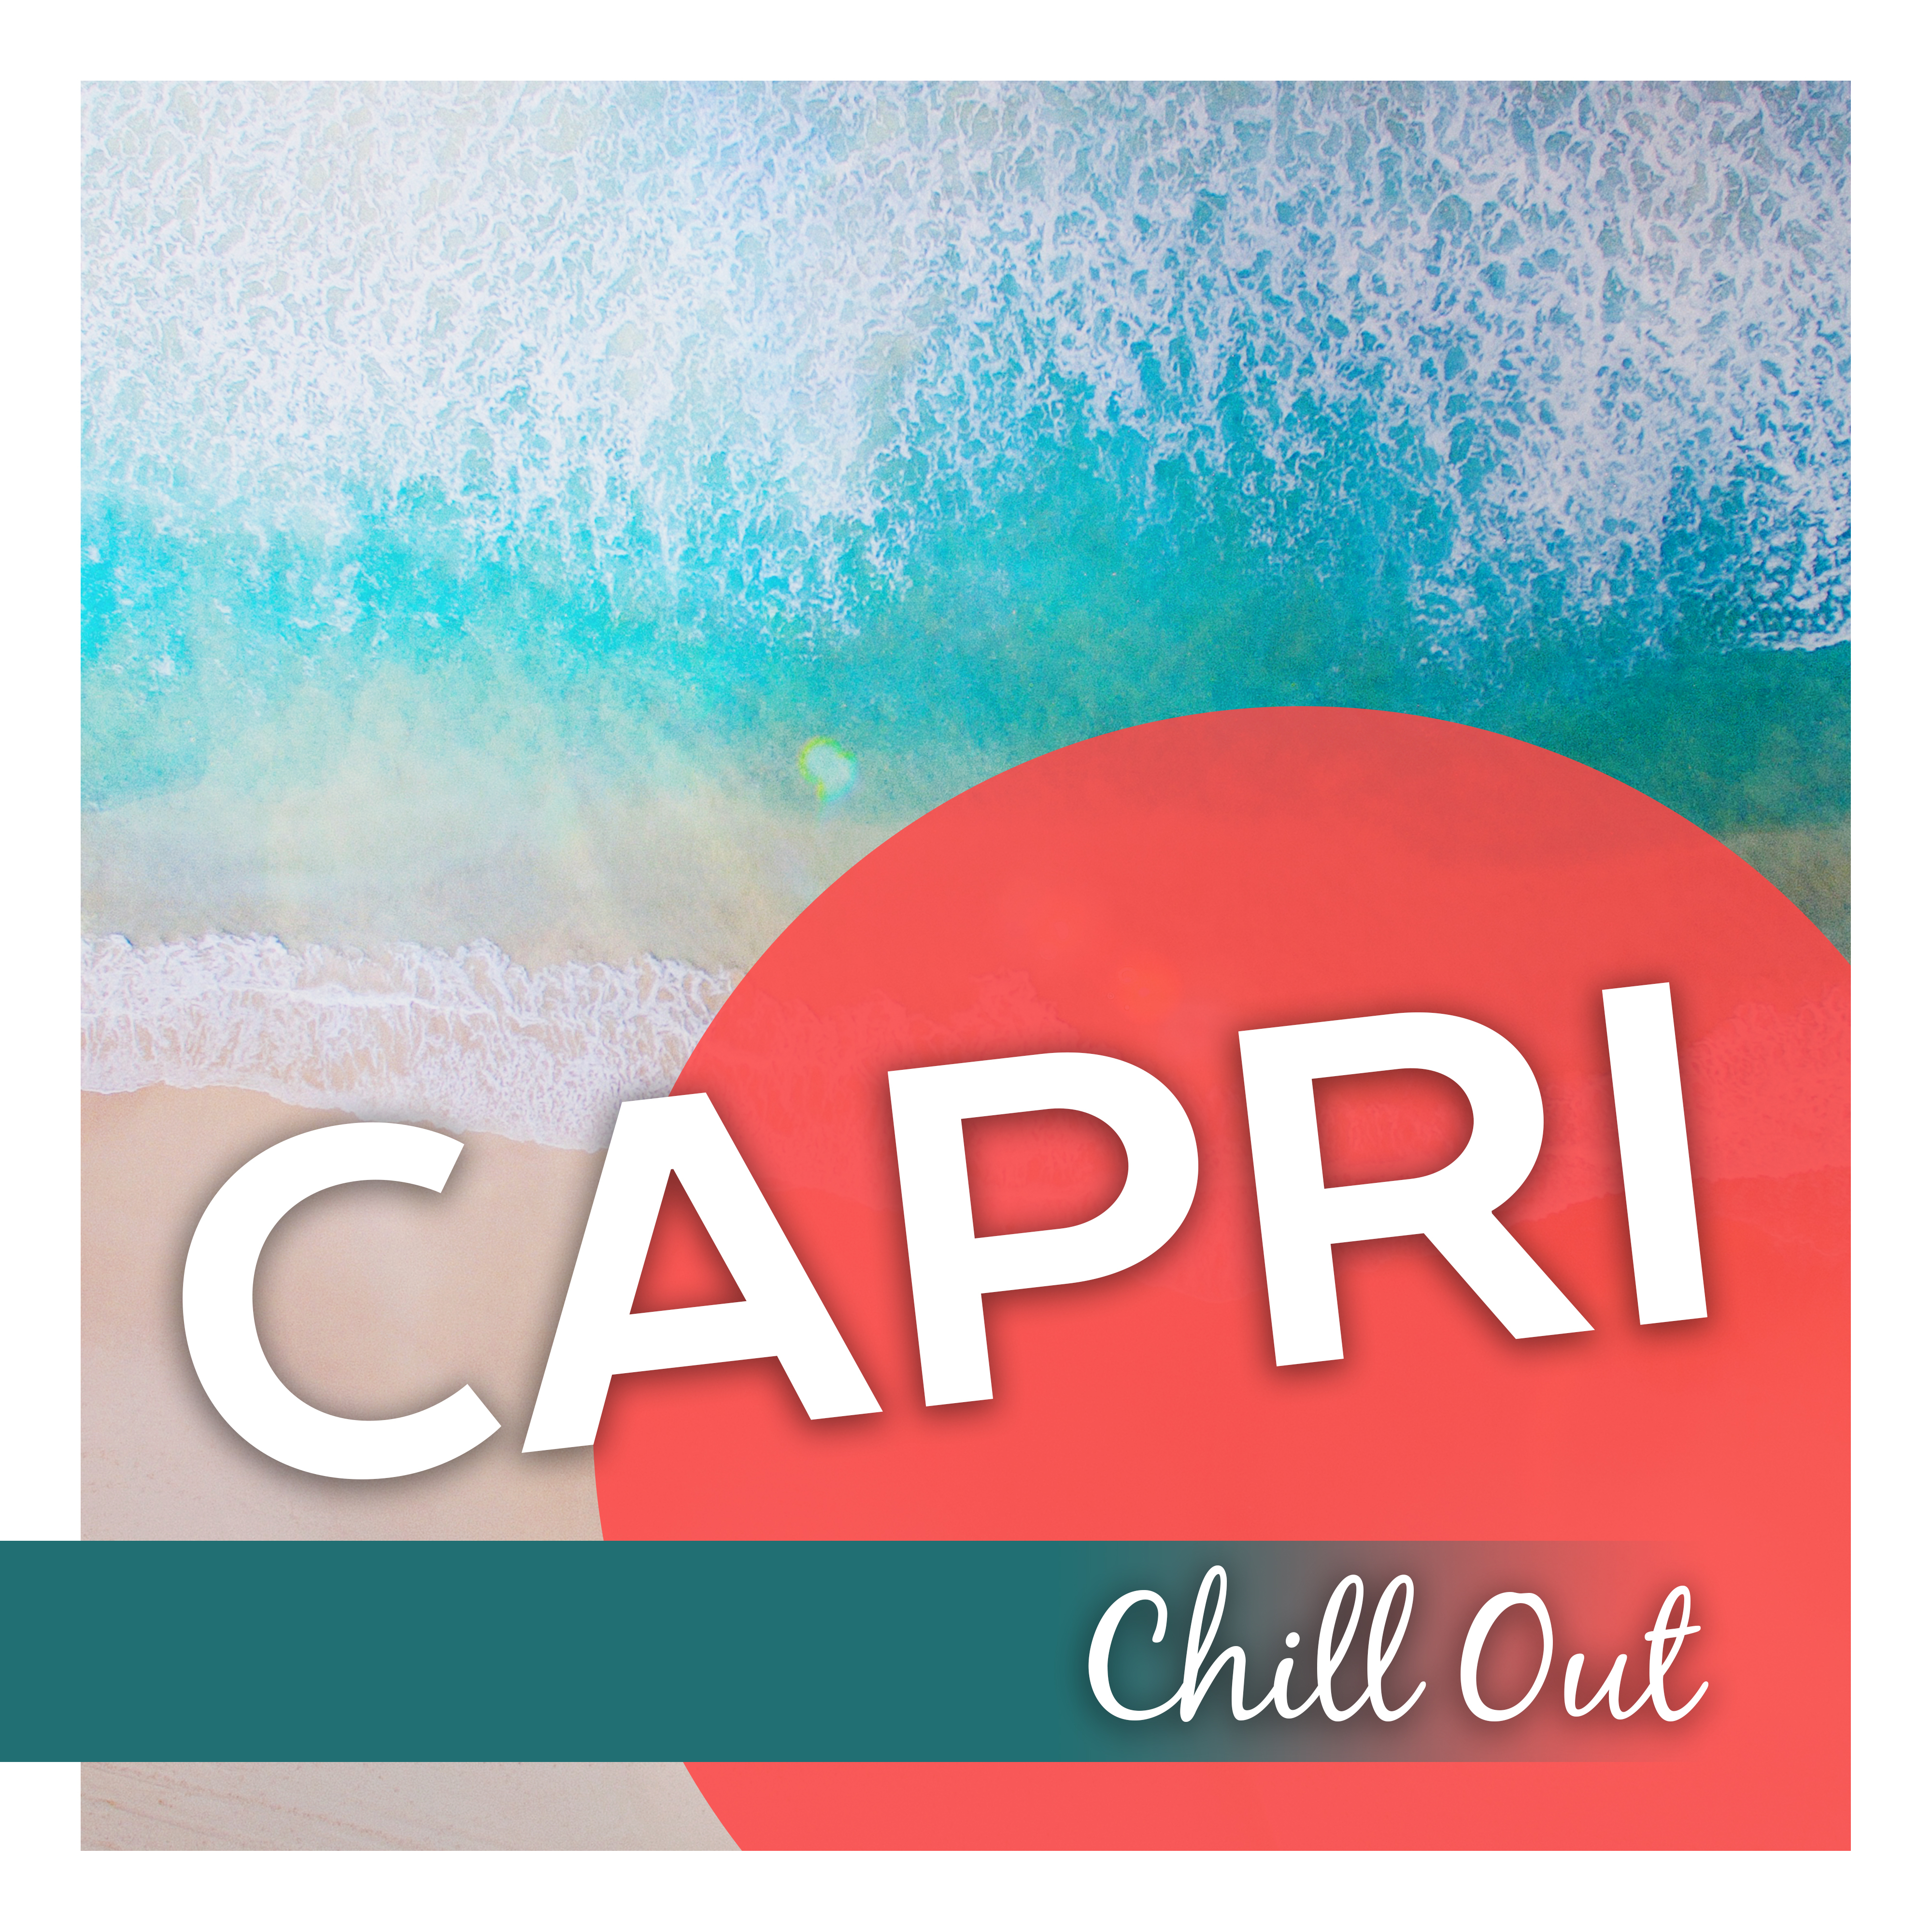 Capri Chill Out  Summertime, Dance Party, Hotel Lounge,  Vibes, Relax, Holiday Hits, Dancefloor, Drink Bar